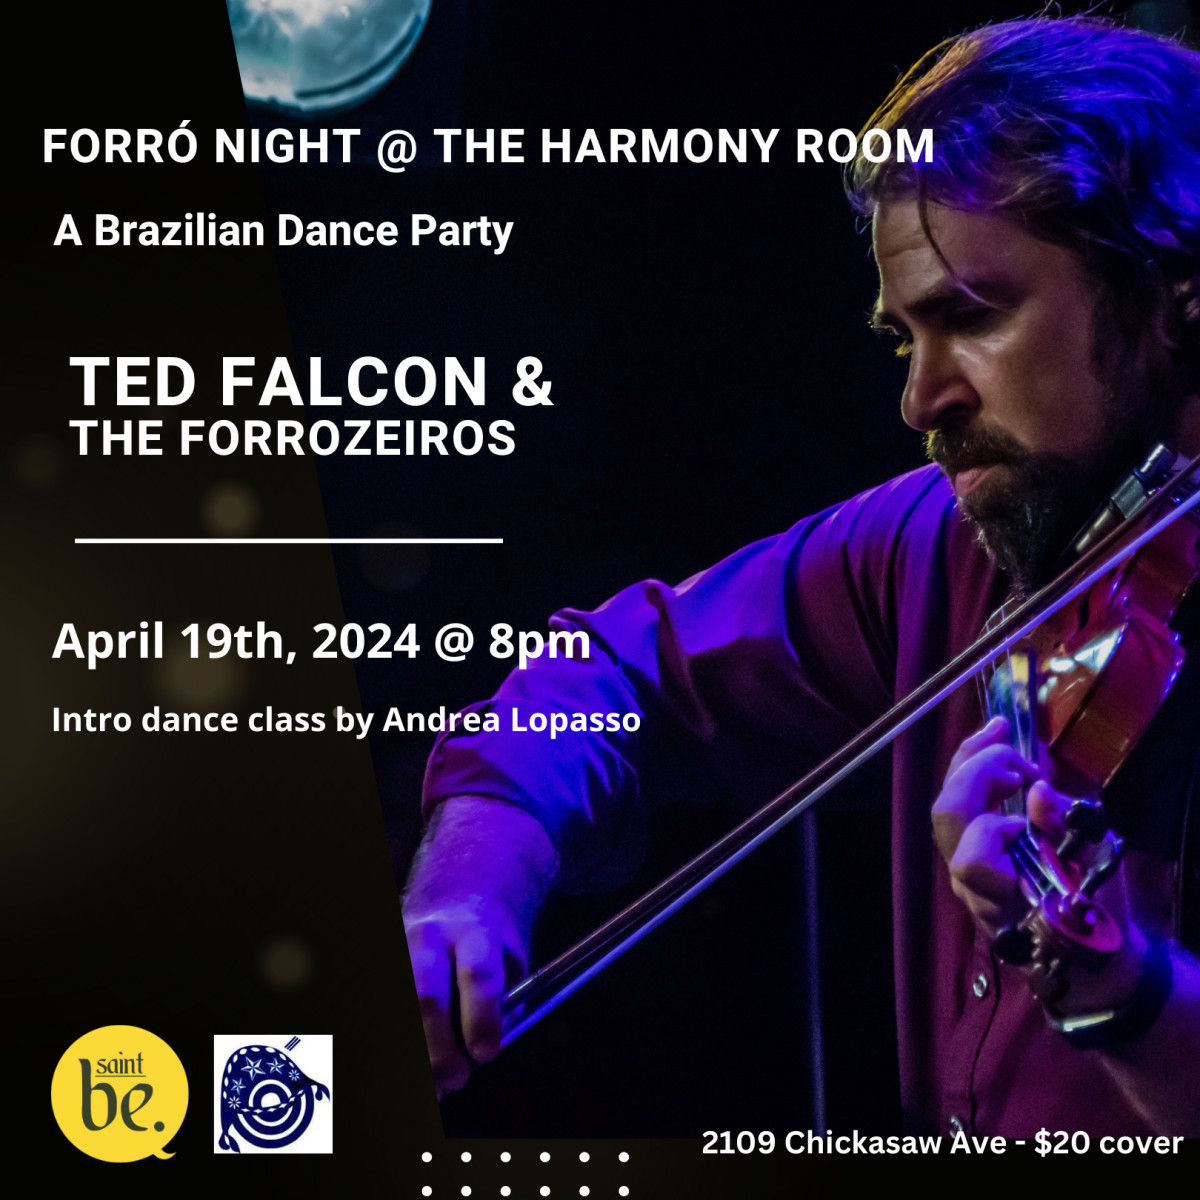 Forró night continues on April 19th!